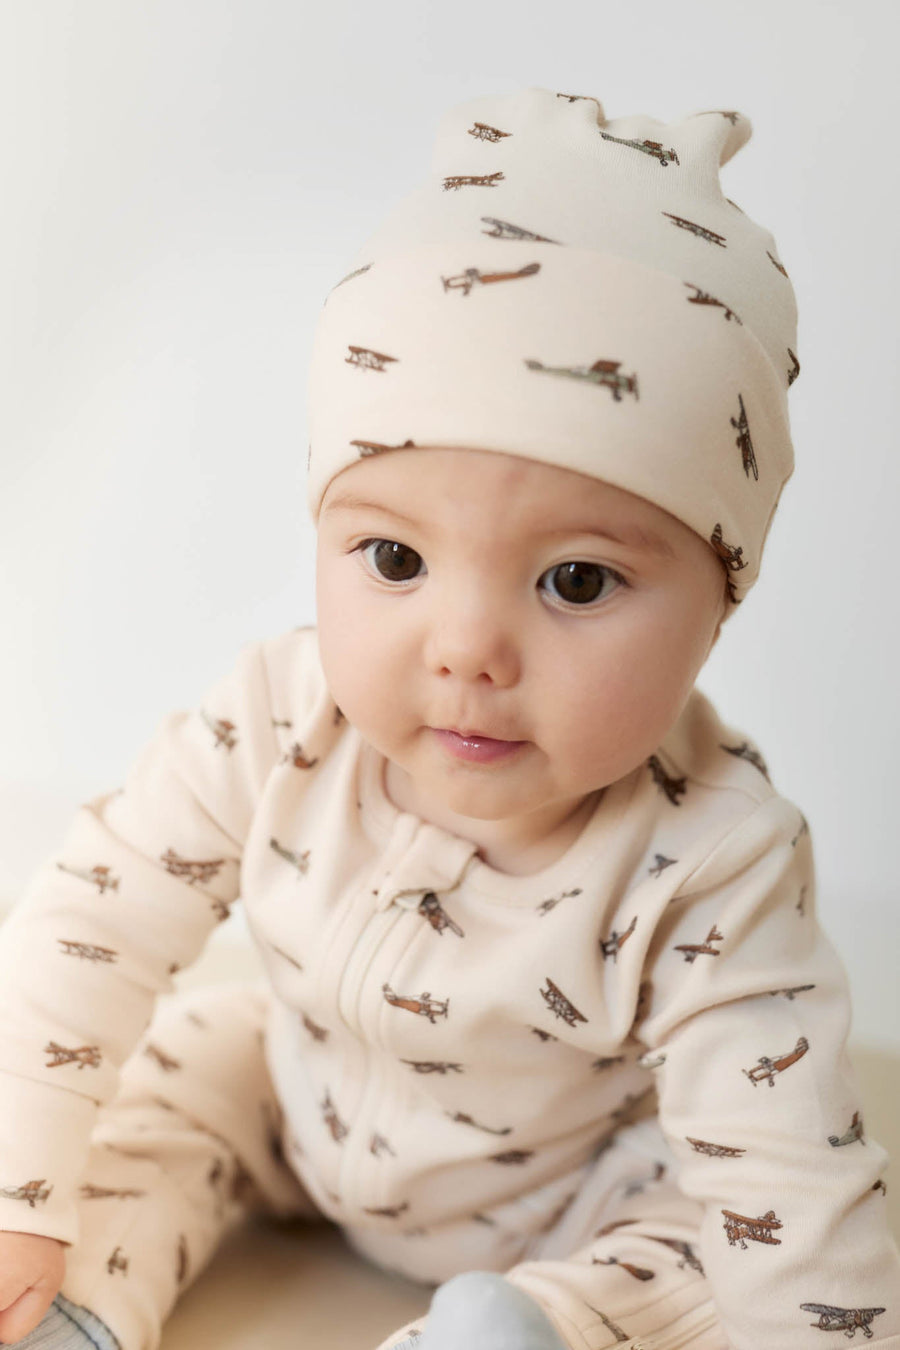 Organic Cotton Reese Zip Onepiece - Avion Shell Childrens Onepiece from Jamie Kay USA